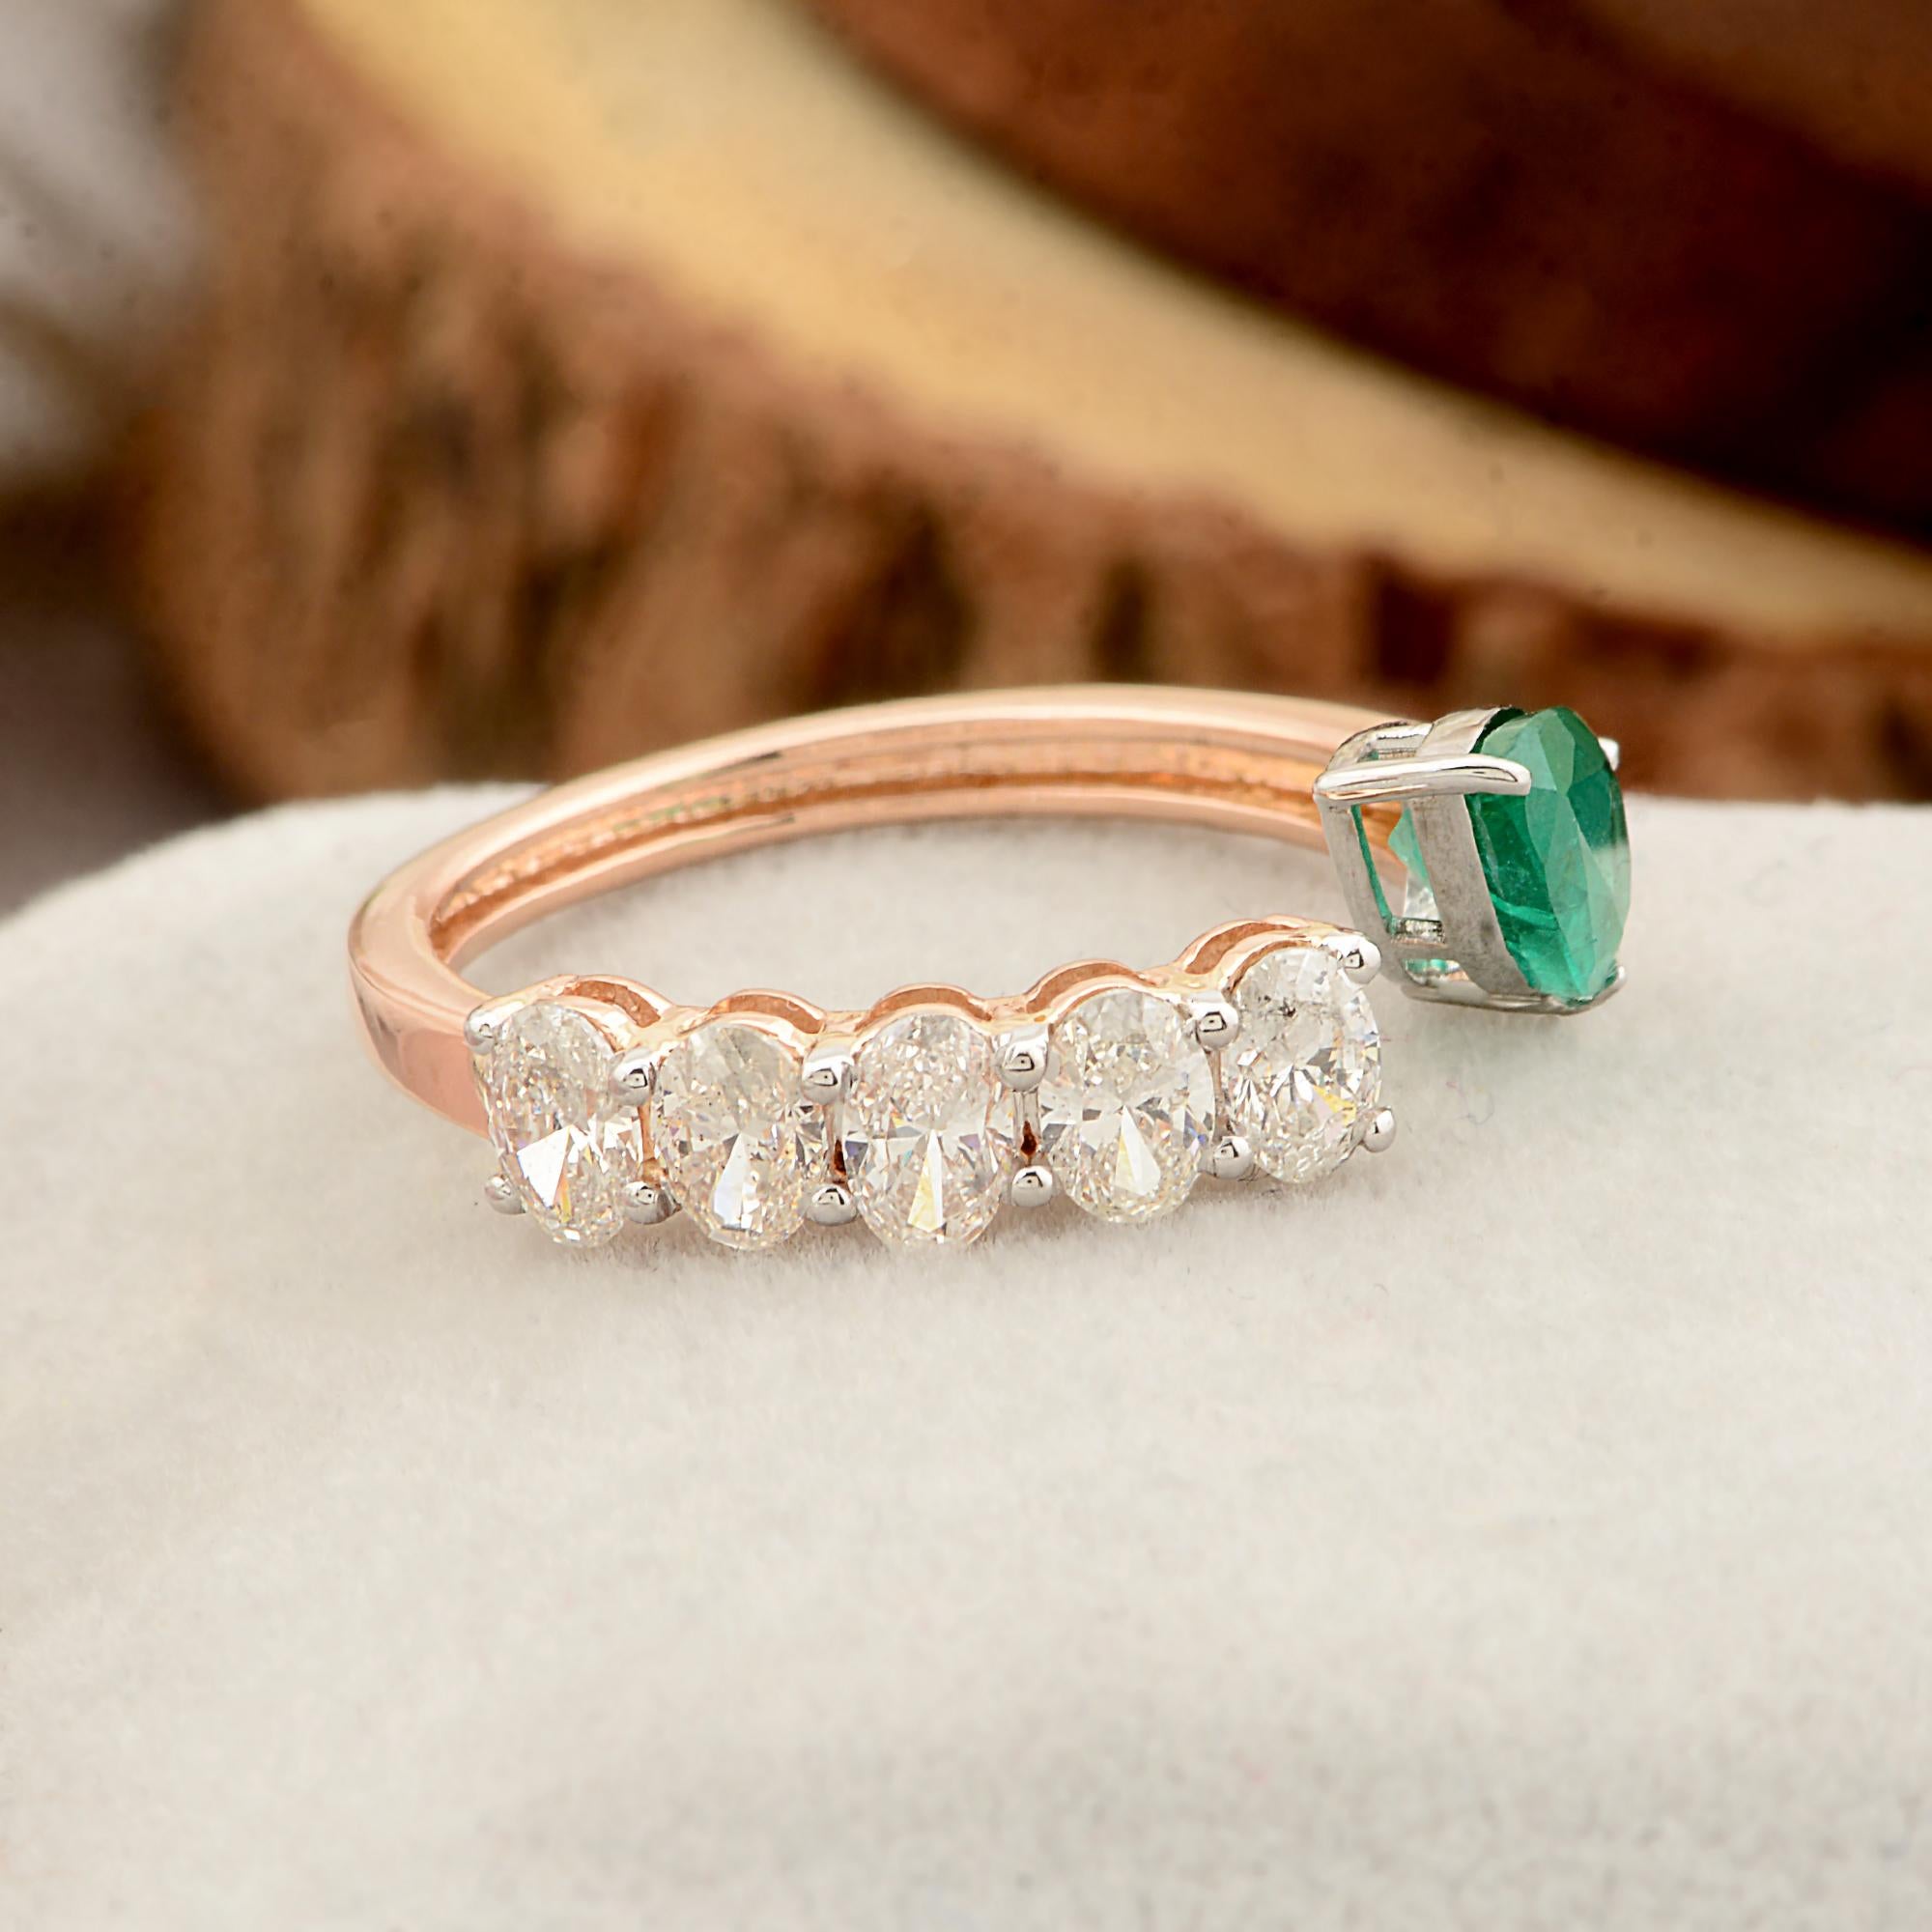 For Sale:  Natural Emerald Gemstone Cuff Band Ring Diamond Solid 18k Rose Gold Fine Jewelry 4